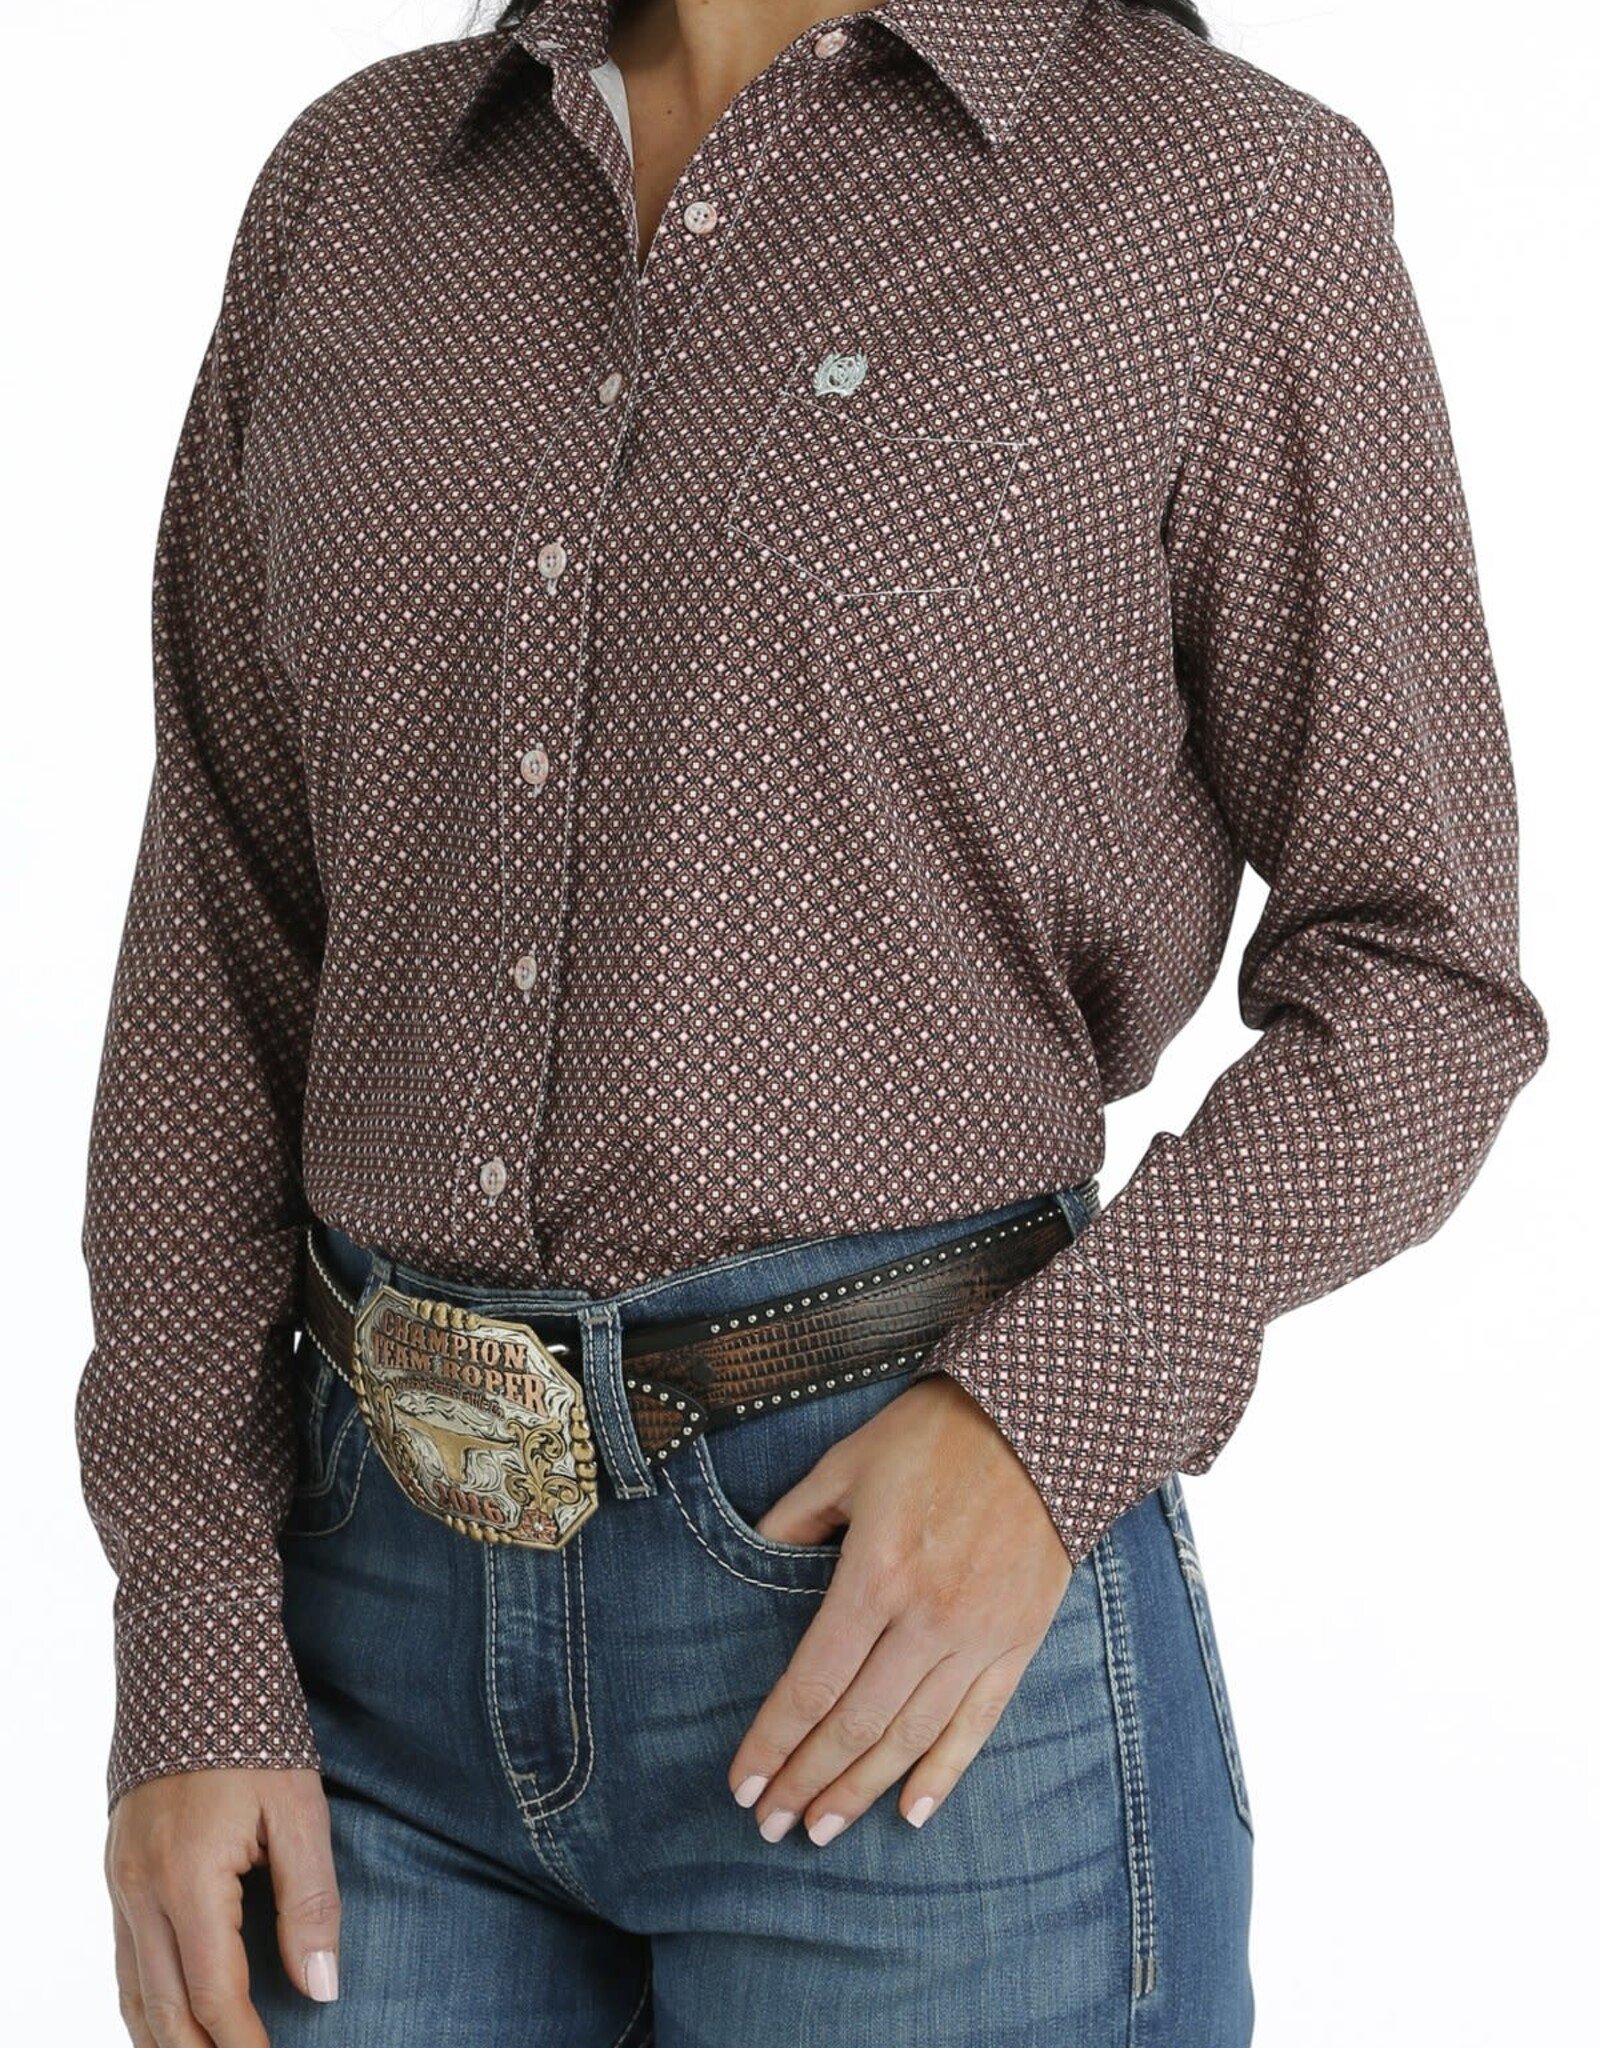 Cinch Womens Cinch Coral and Olive Geo Print Arena Flex Long Sleeve Button Western Shirt